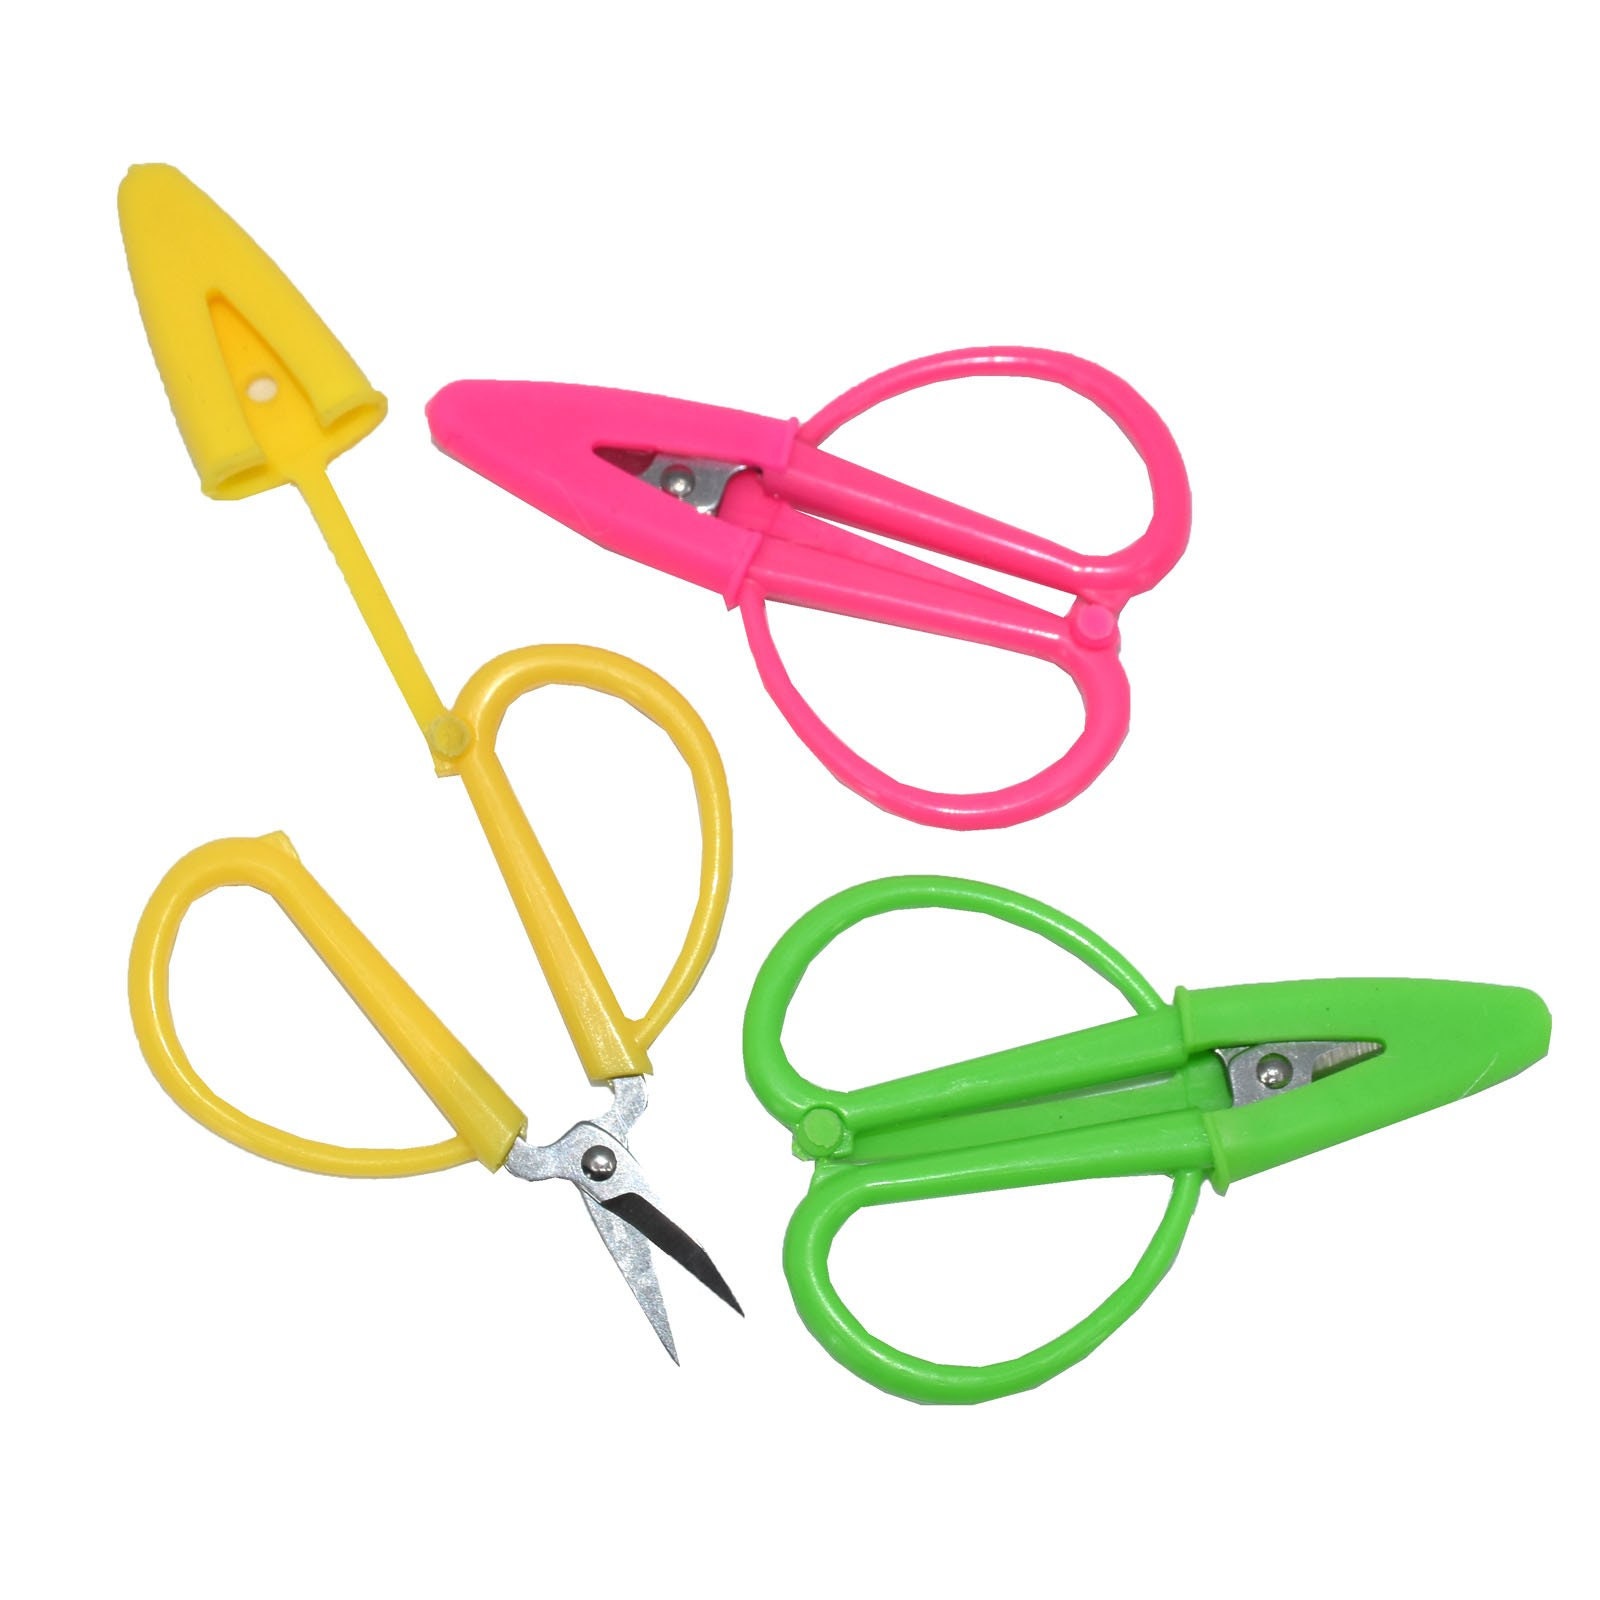 Travel Mini Super Snips Scissors With Protector Over Point Yellow